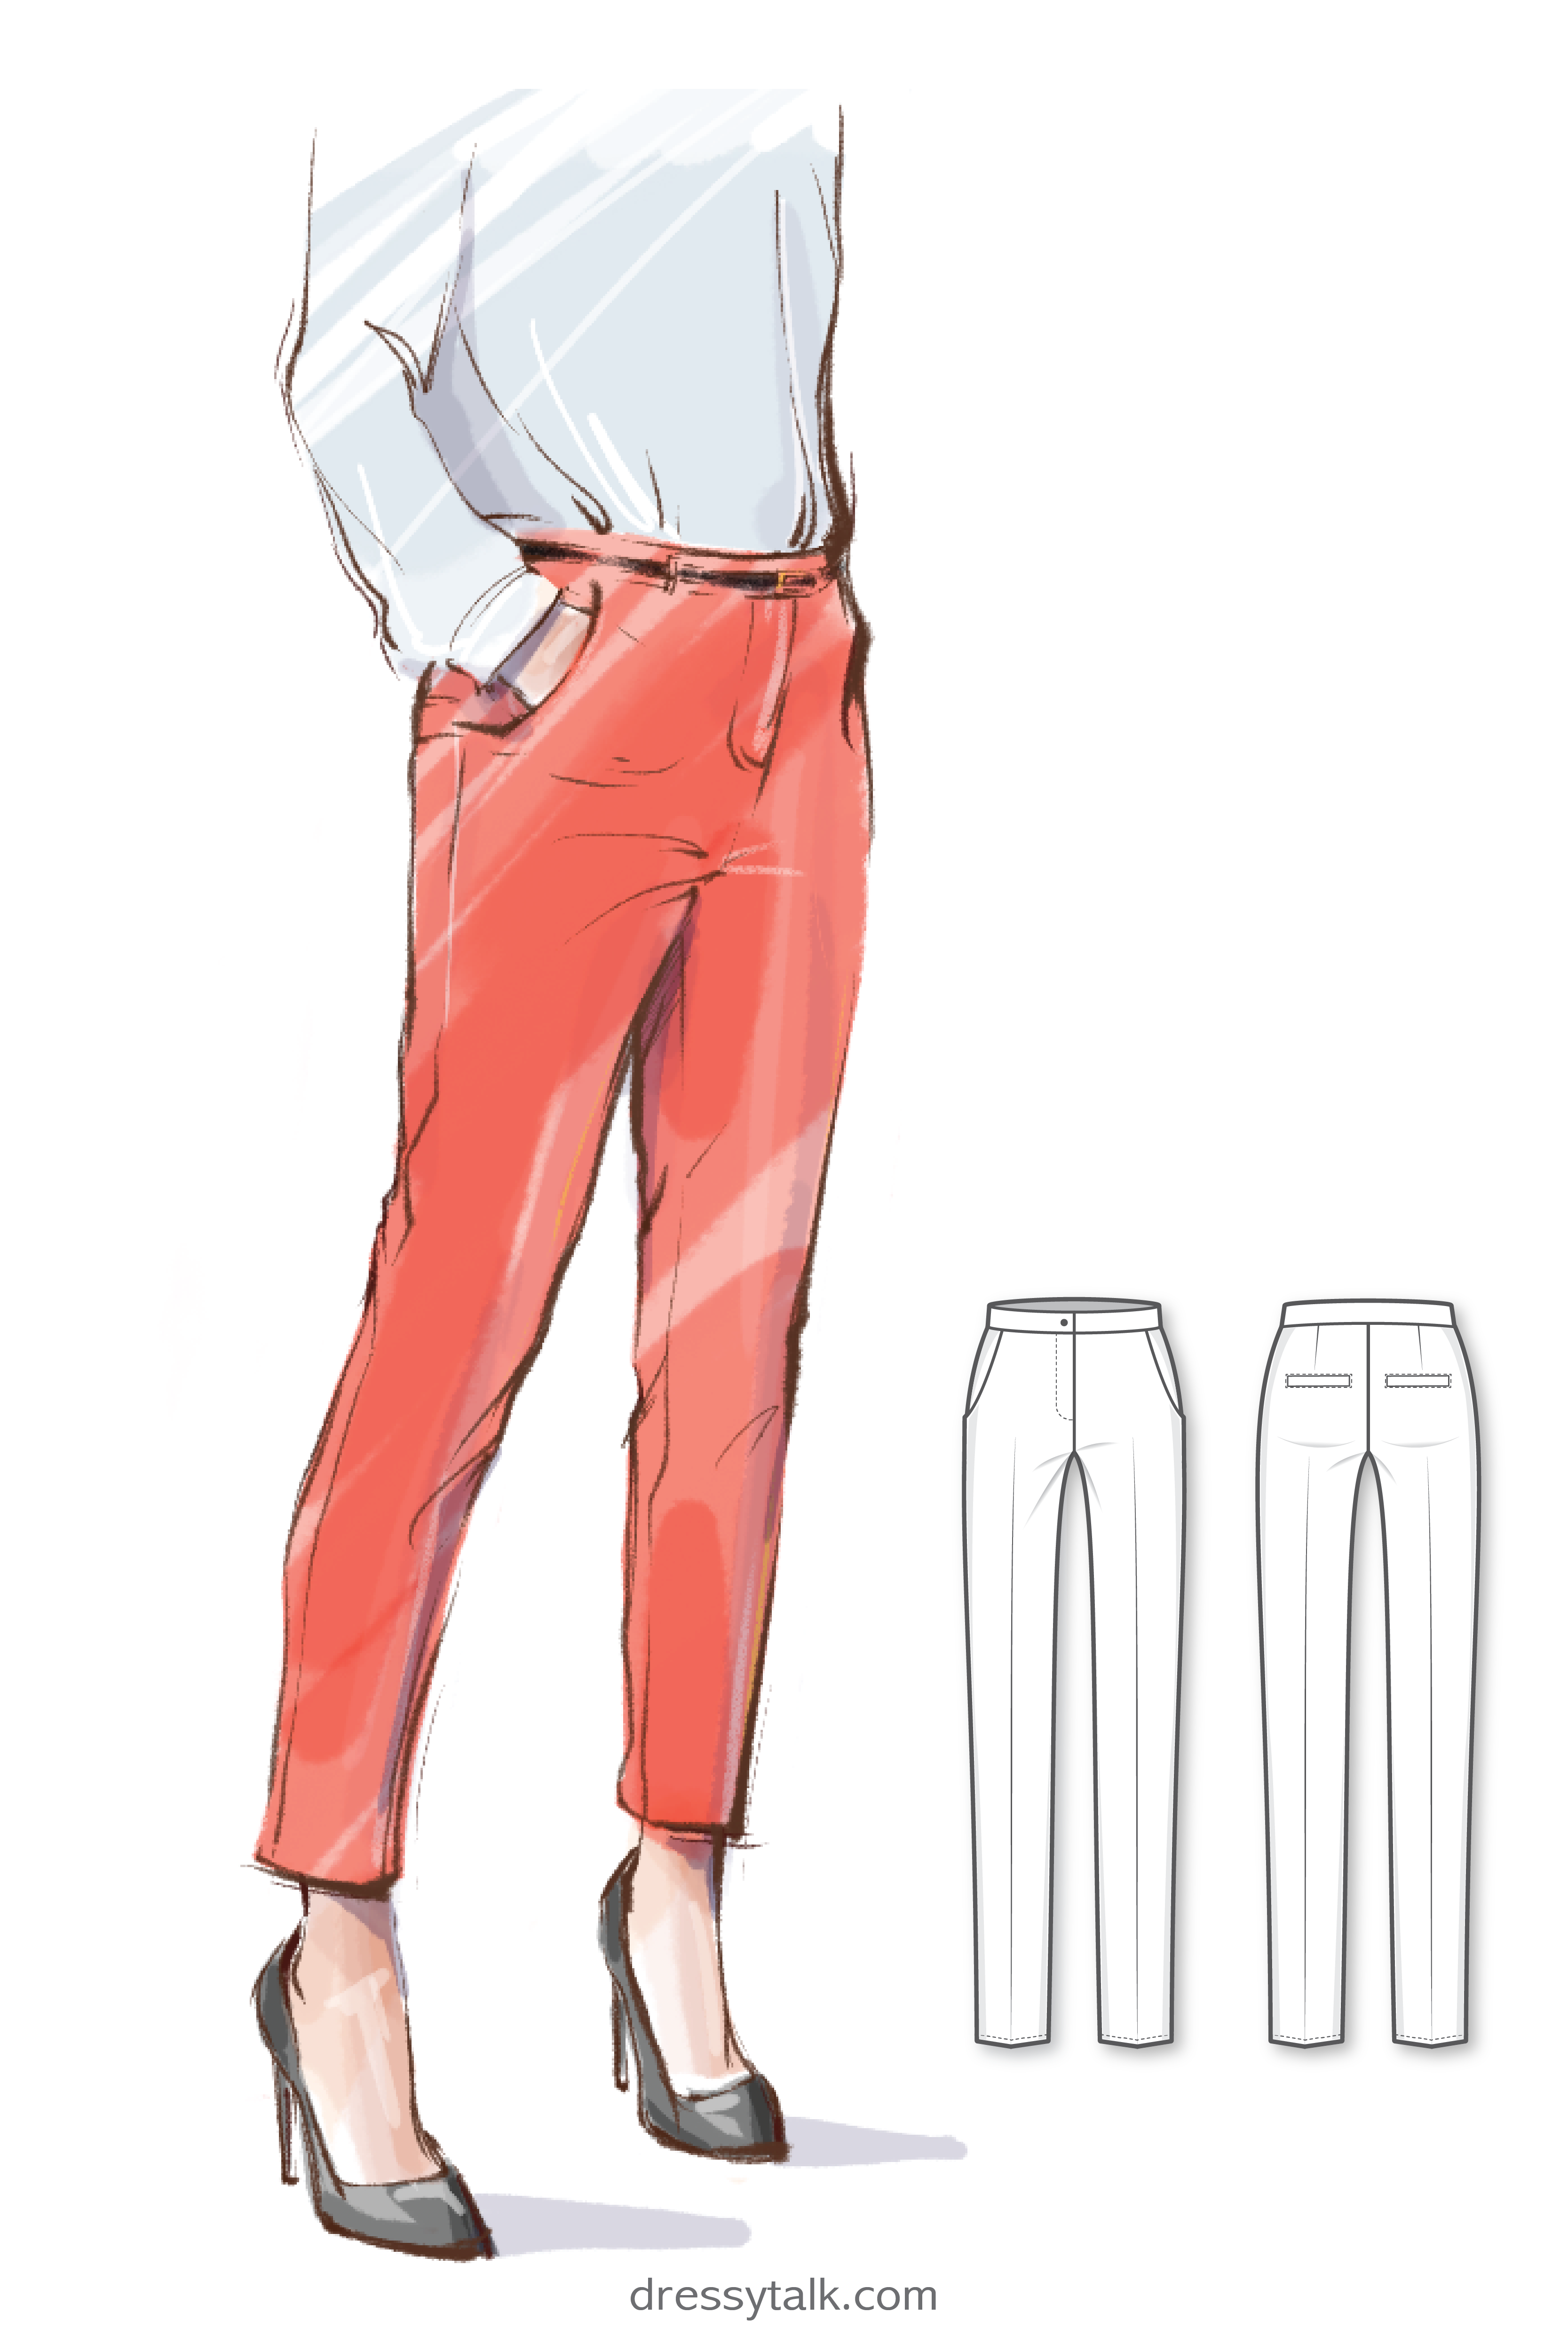 12 Women's Formal Wear Pants Deserving a Place in Any Work Capsule